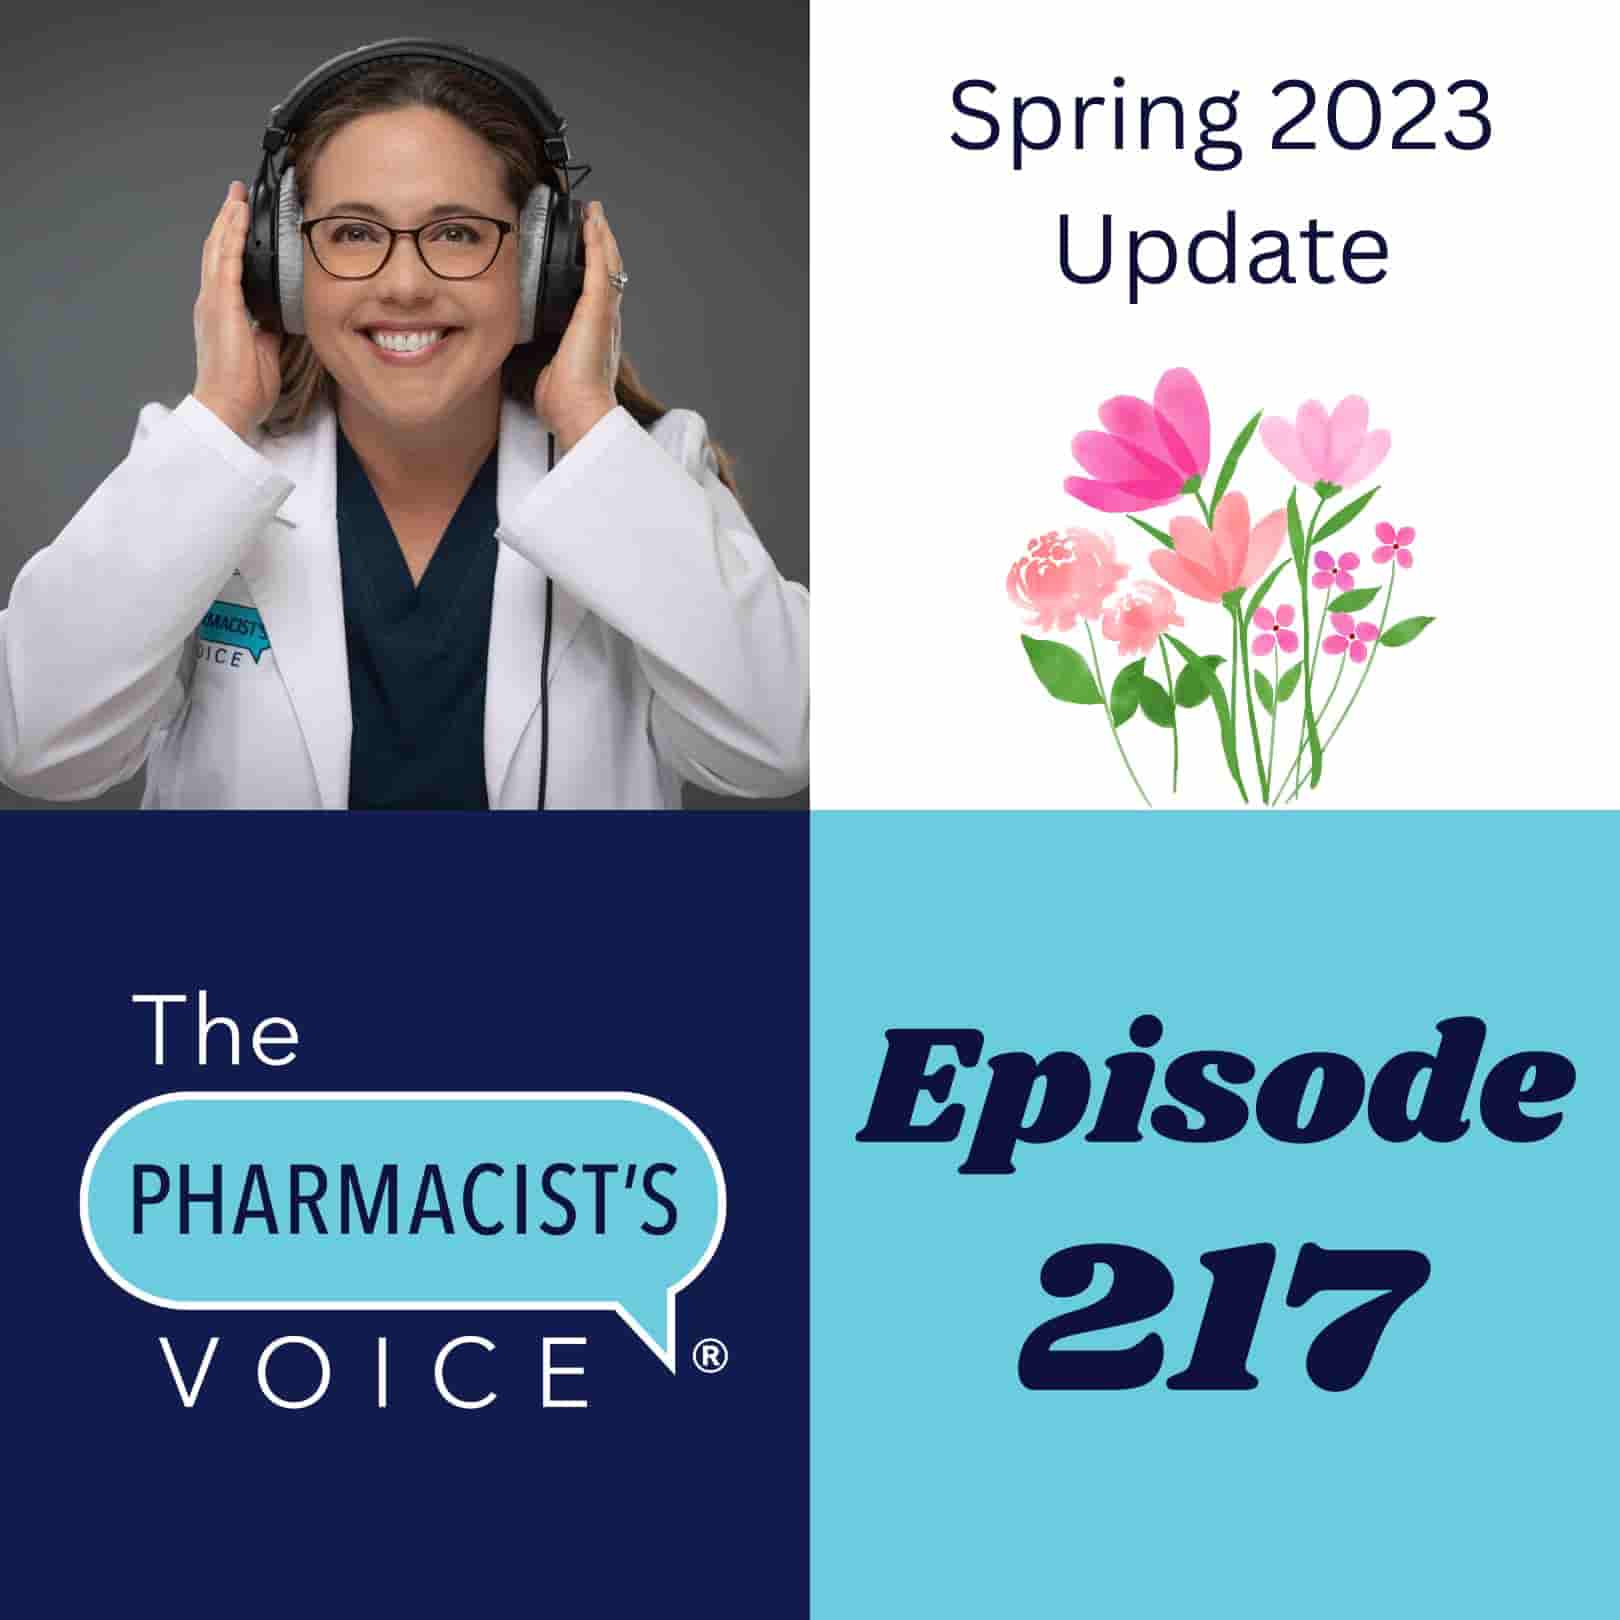 This is episode artwork for The Pharmacist's Voice Podcast. The image is square and has 3 main colors: navy blue, light blue, and white. Kim Newlove is featured in the image. She has brown hair, brown eyes, and glasses.